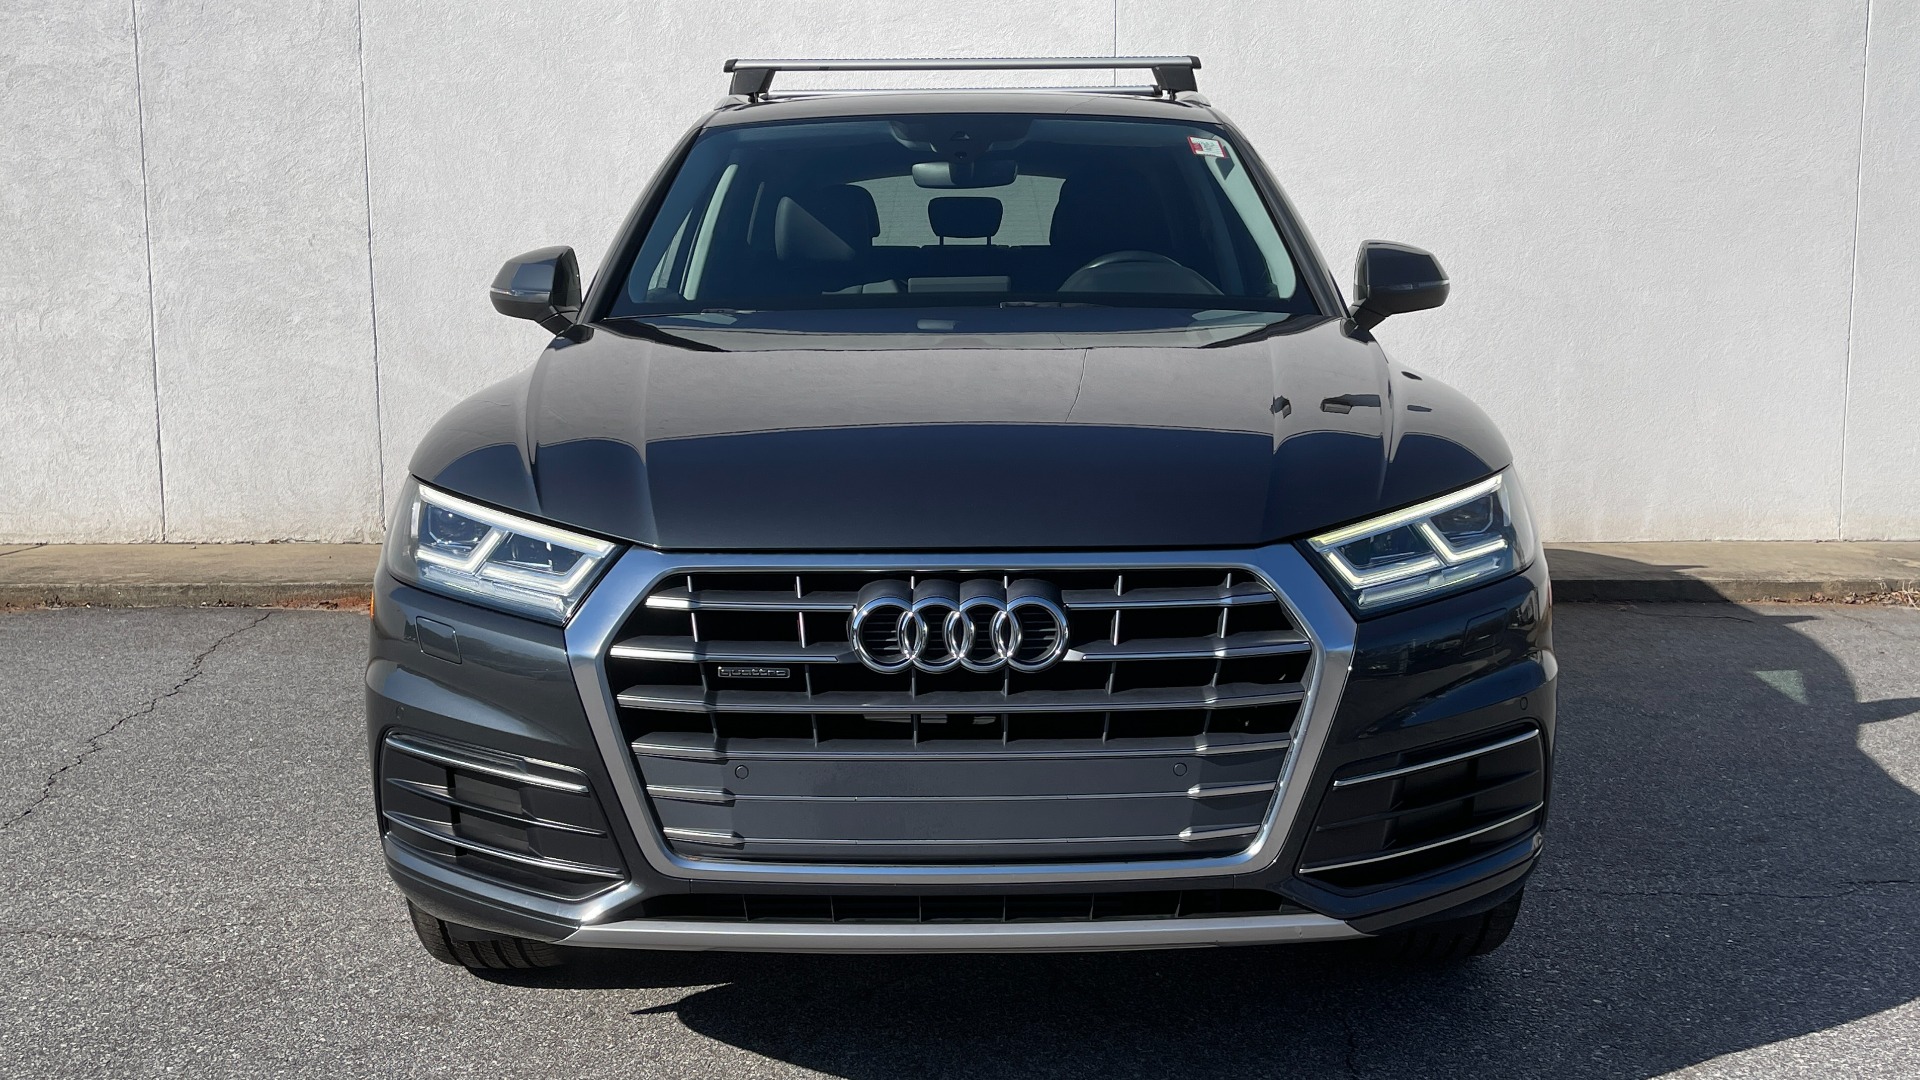 Used 2019 Audi Q5 PREMIUM PLUS / NAV / SUNROOF / WARM WTHR / PARK SYS PLUS / REARVIEW for sale $40,495 at Formula Imports in Charlotte NC 28227 8